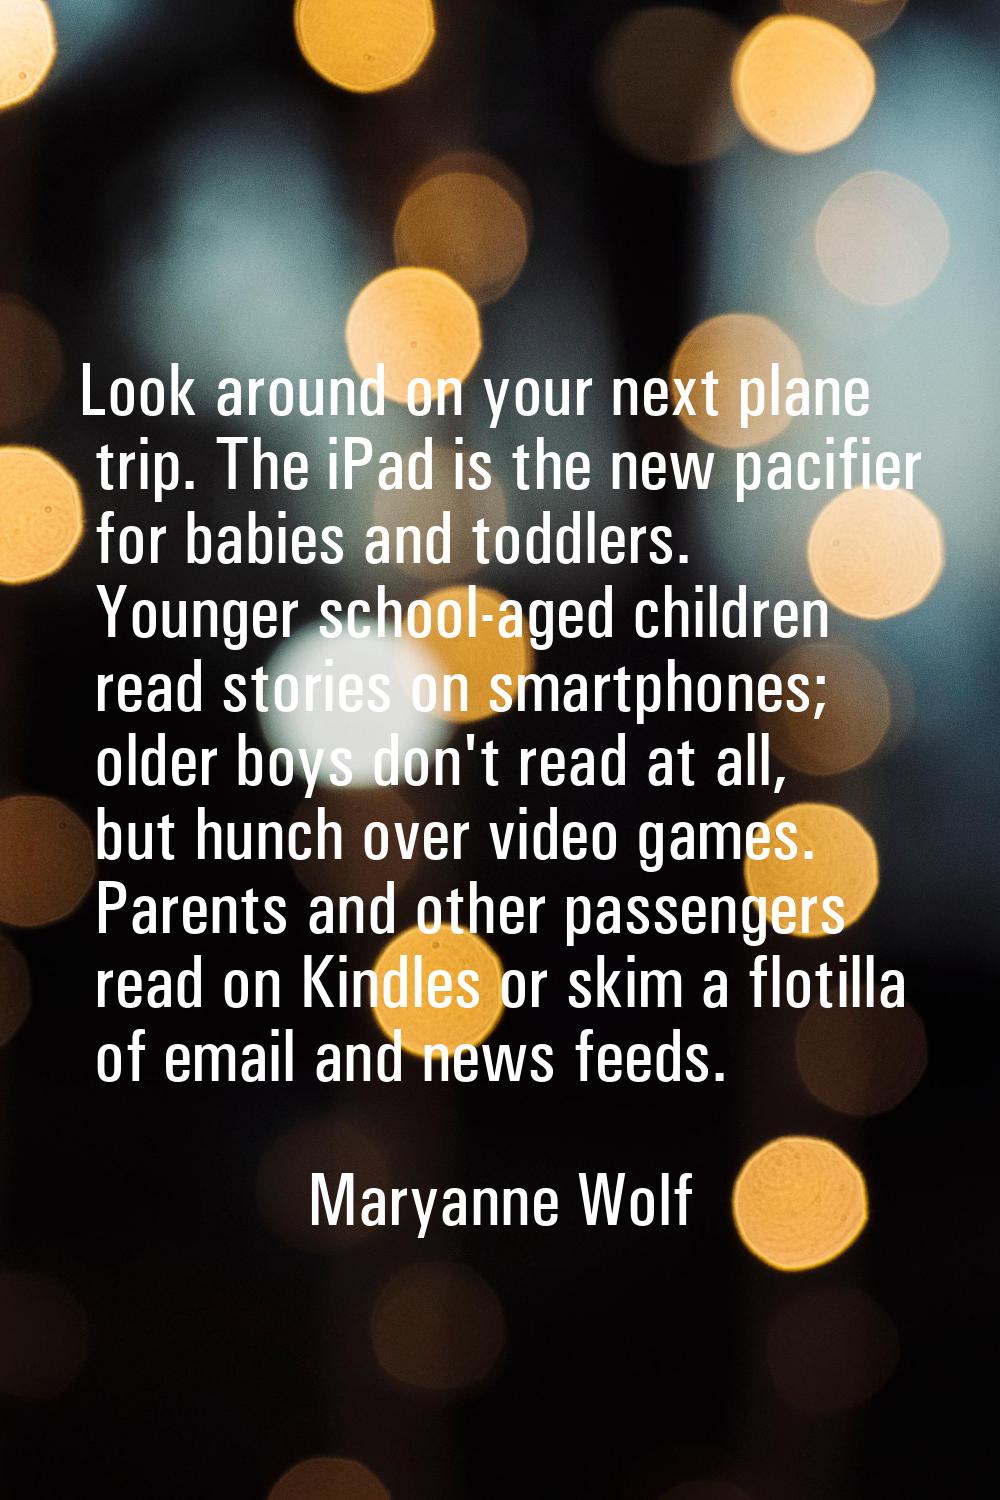 Look around on your next plane trip. The iPad is the new pacifier for babies and toddlers. Younger 